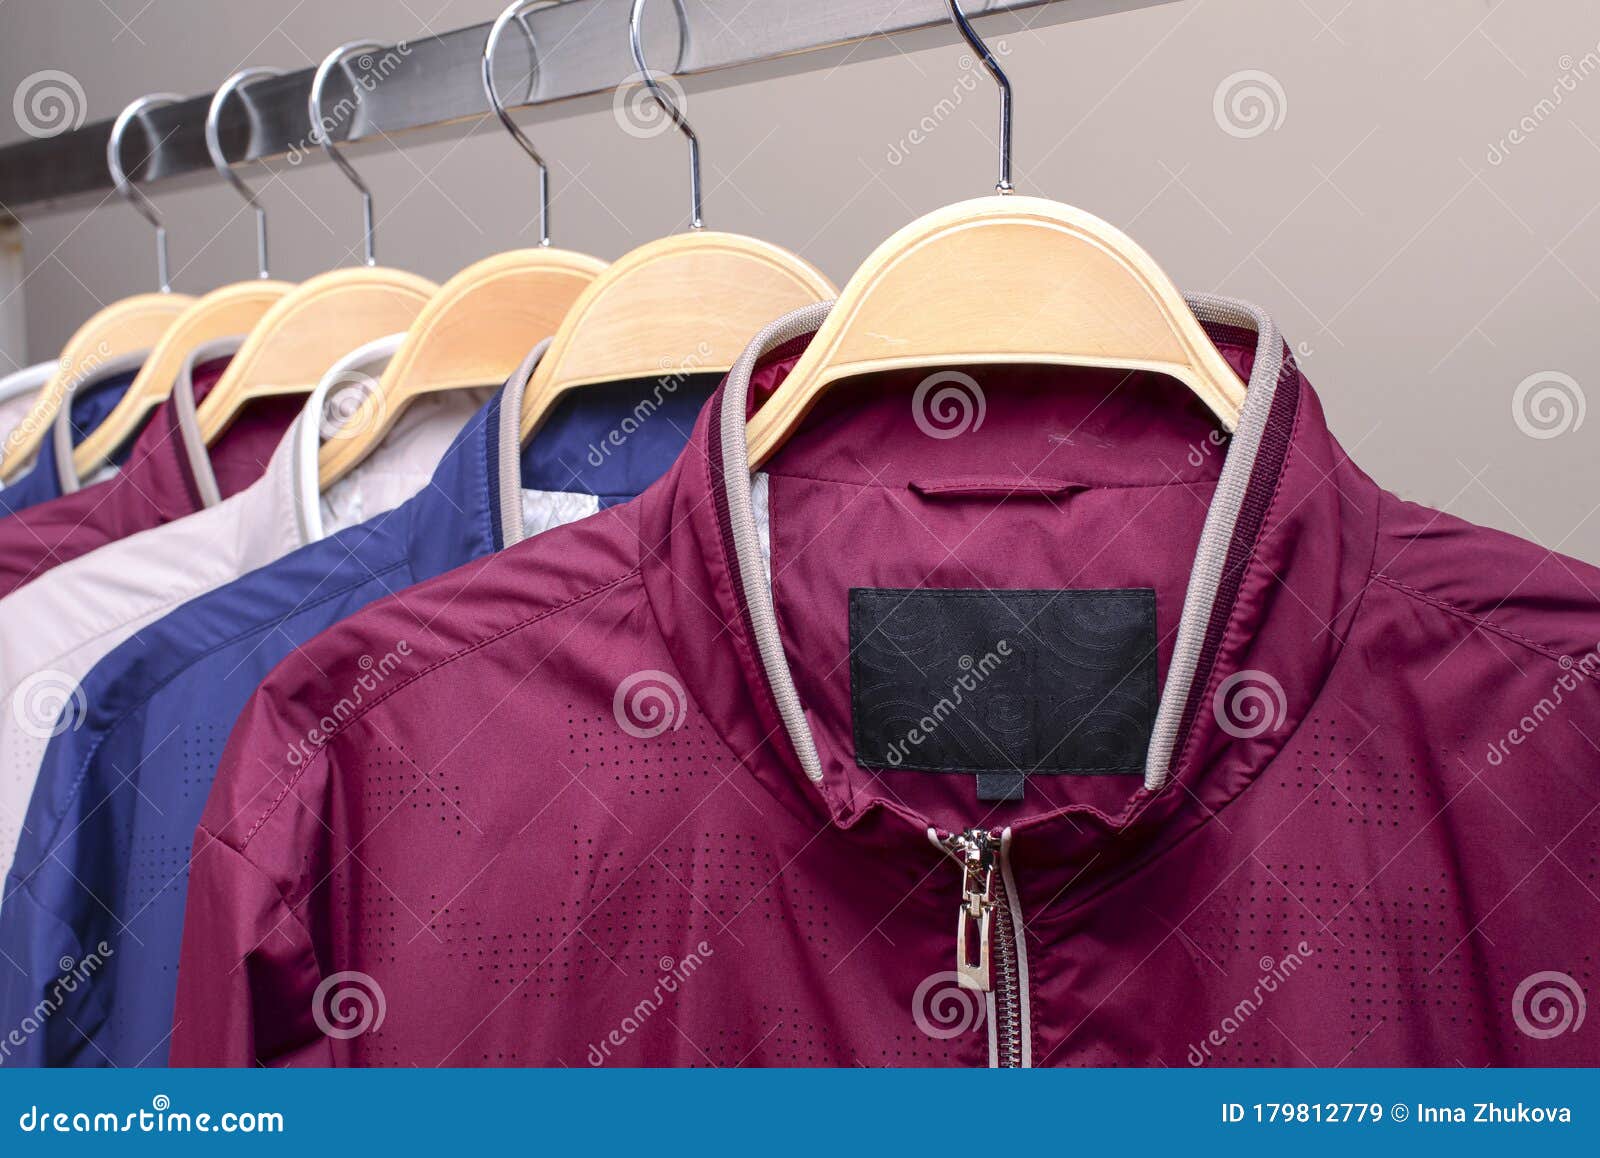 Row of Many Different Colorful Hoodie Jackets, Sport Jackets for